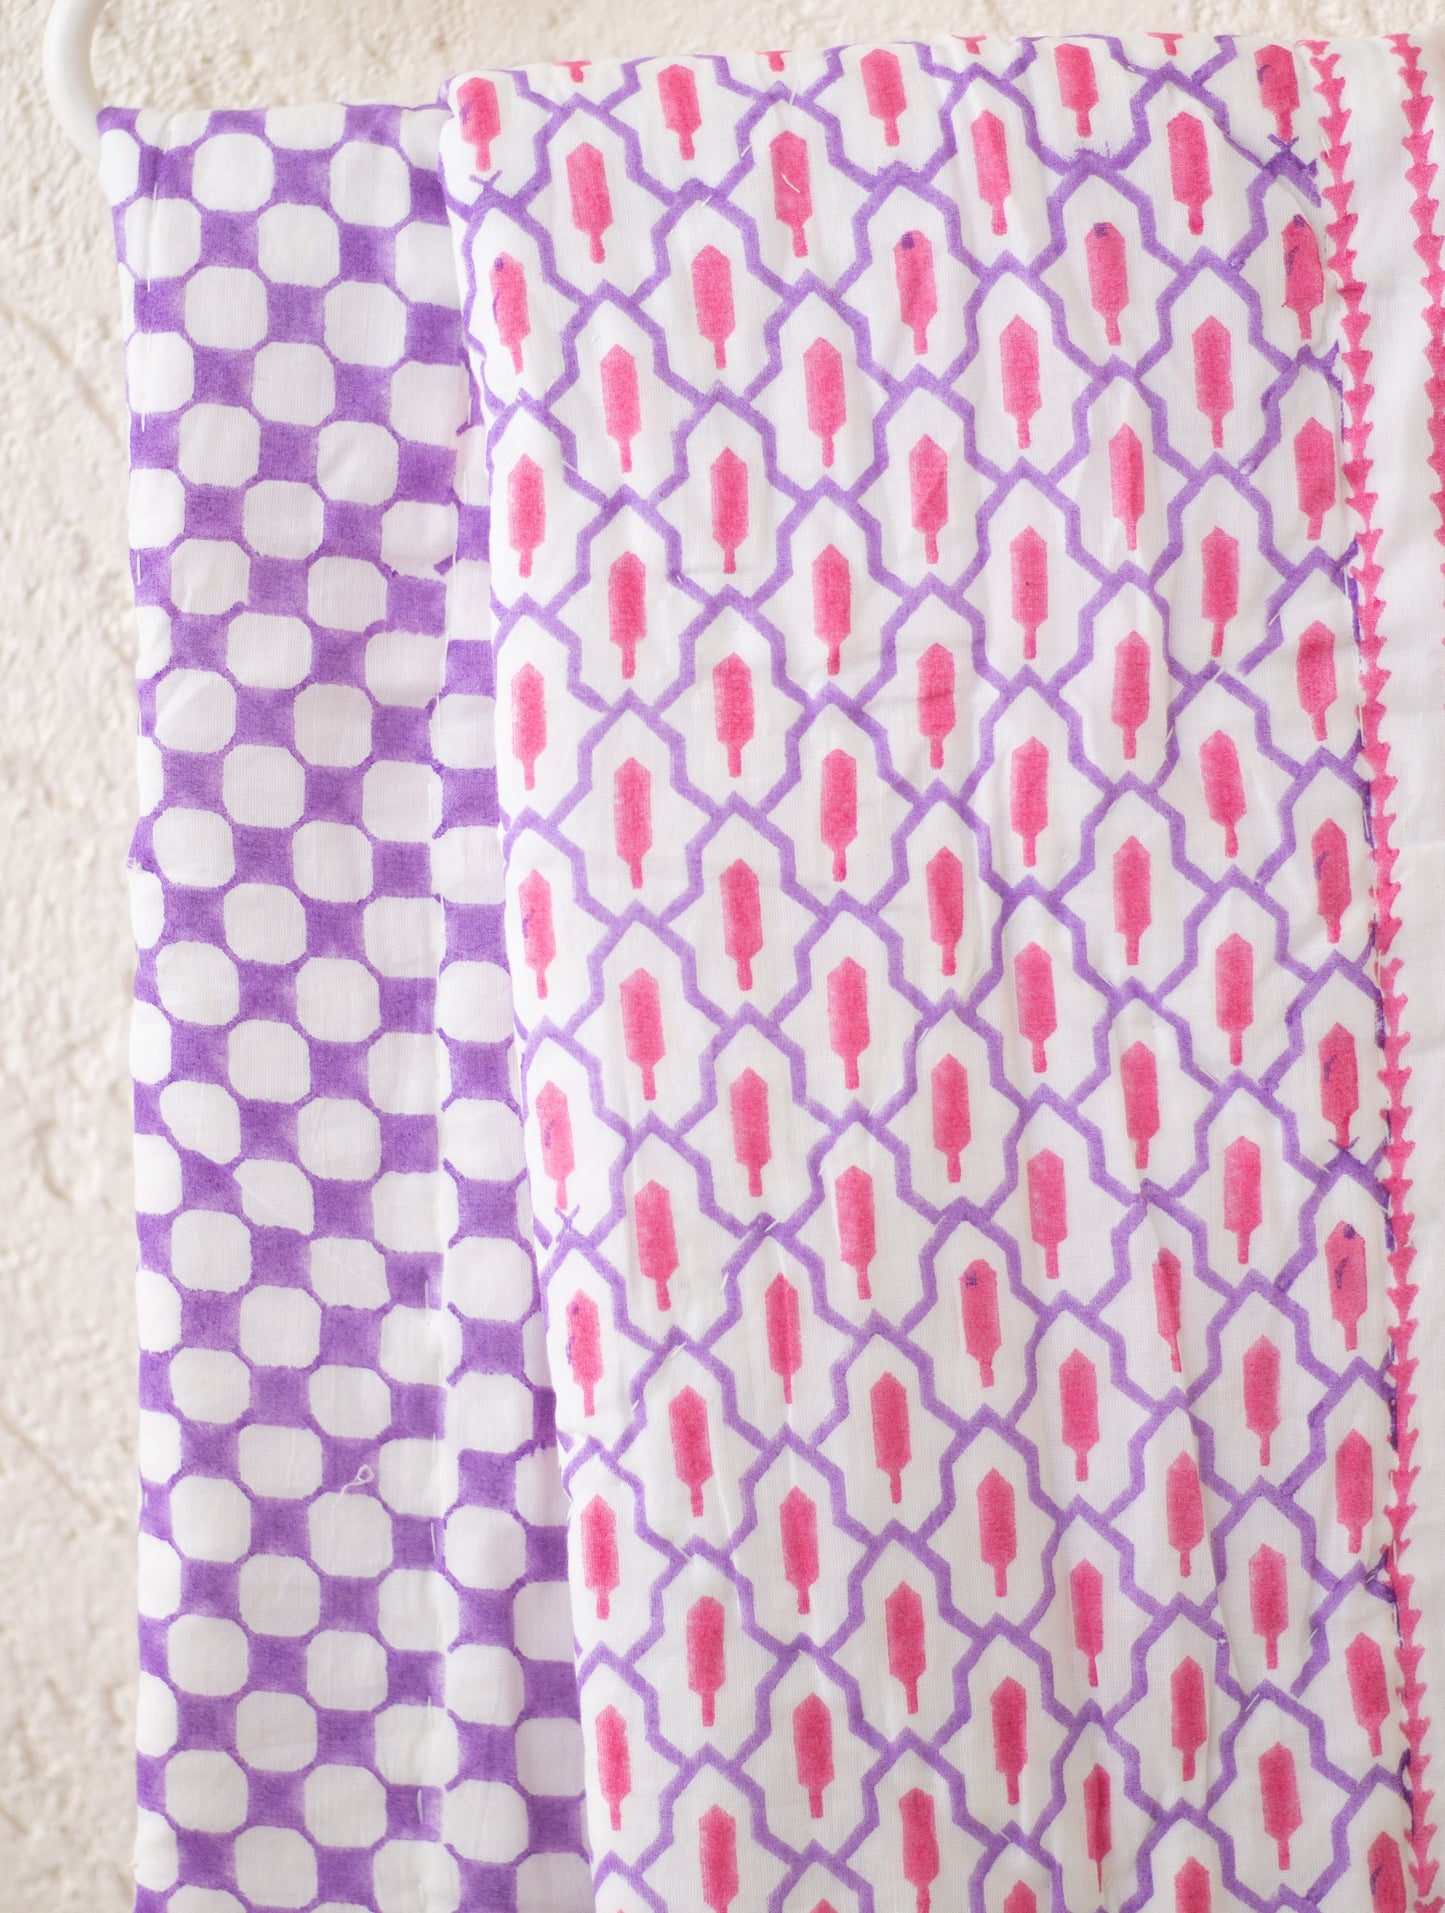 Geometric baby quilt -  Purple and Pink quilt - Baby size - 36x48 inches